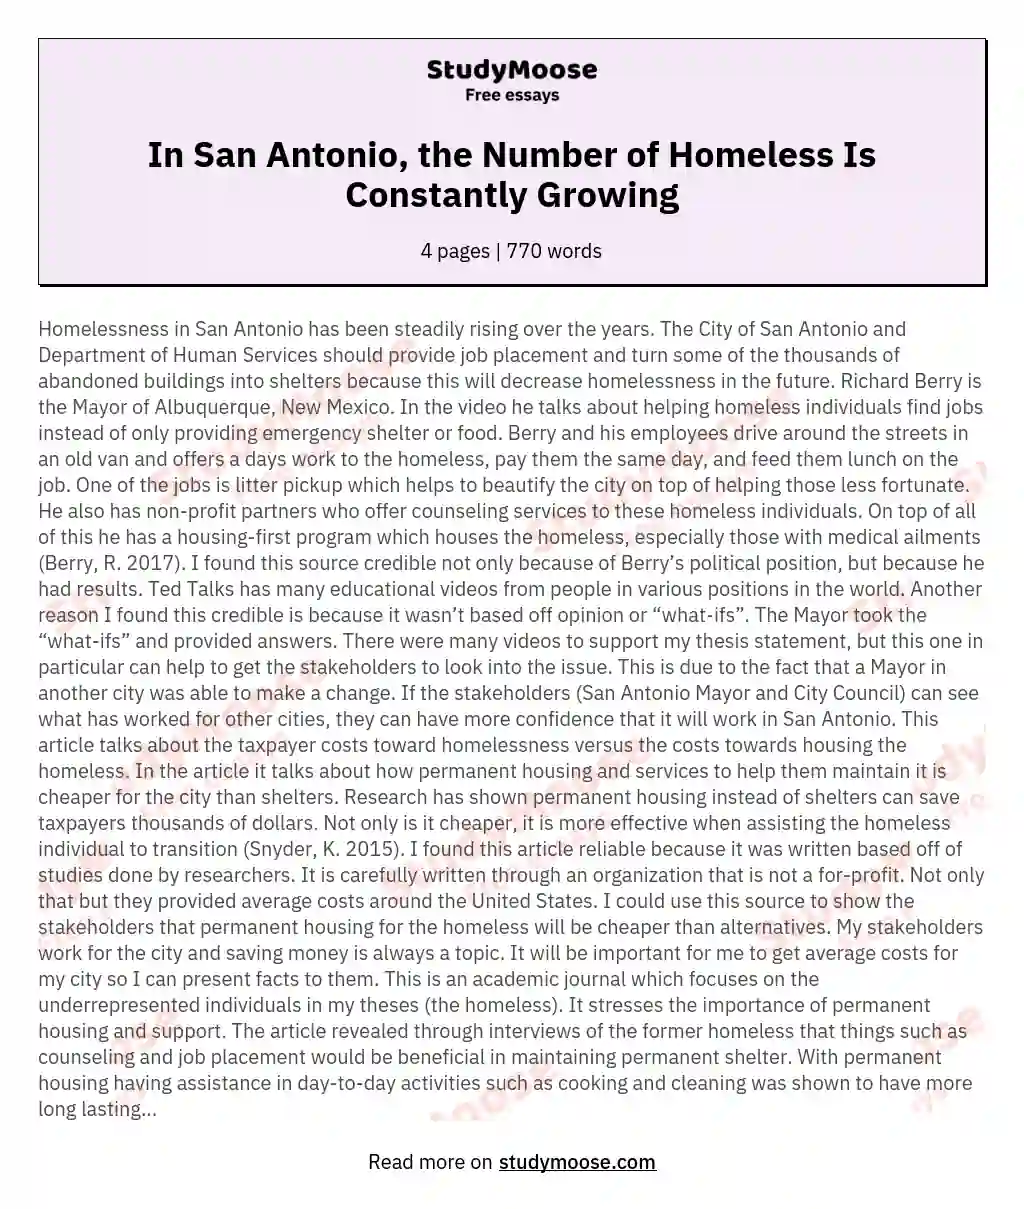 In San Antonio, the Number of Homeless Is Constantly Growing essay